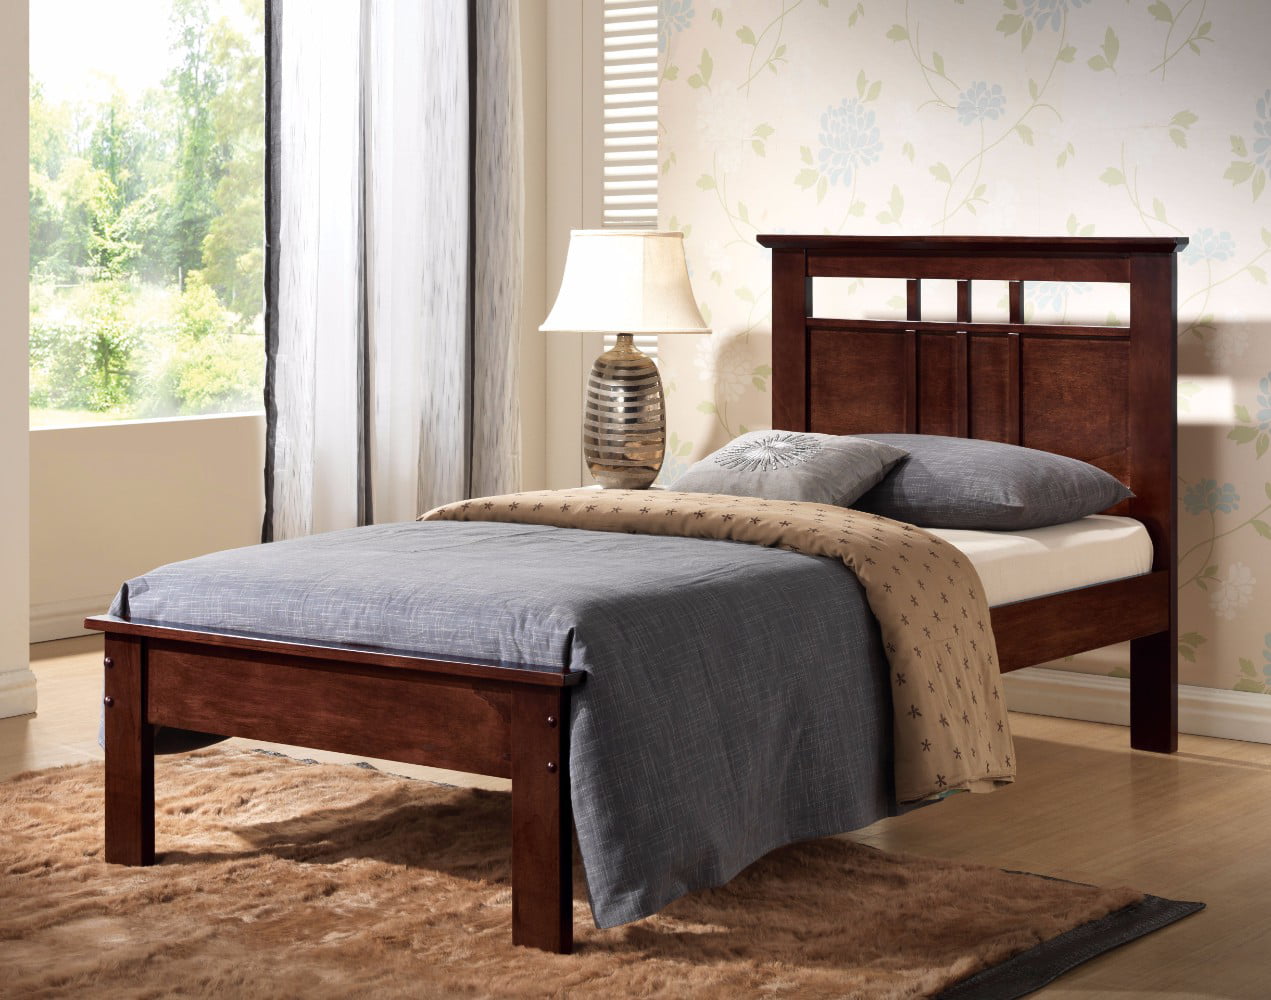 xl twin mattress and frame and headboard